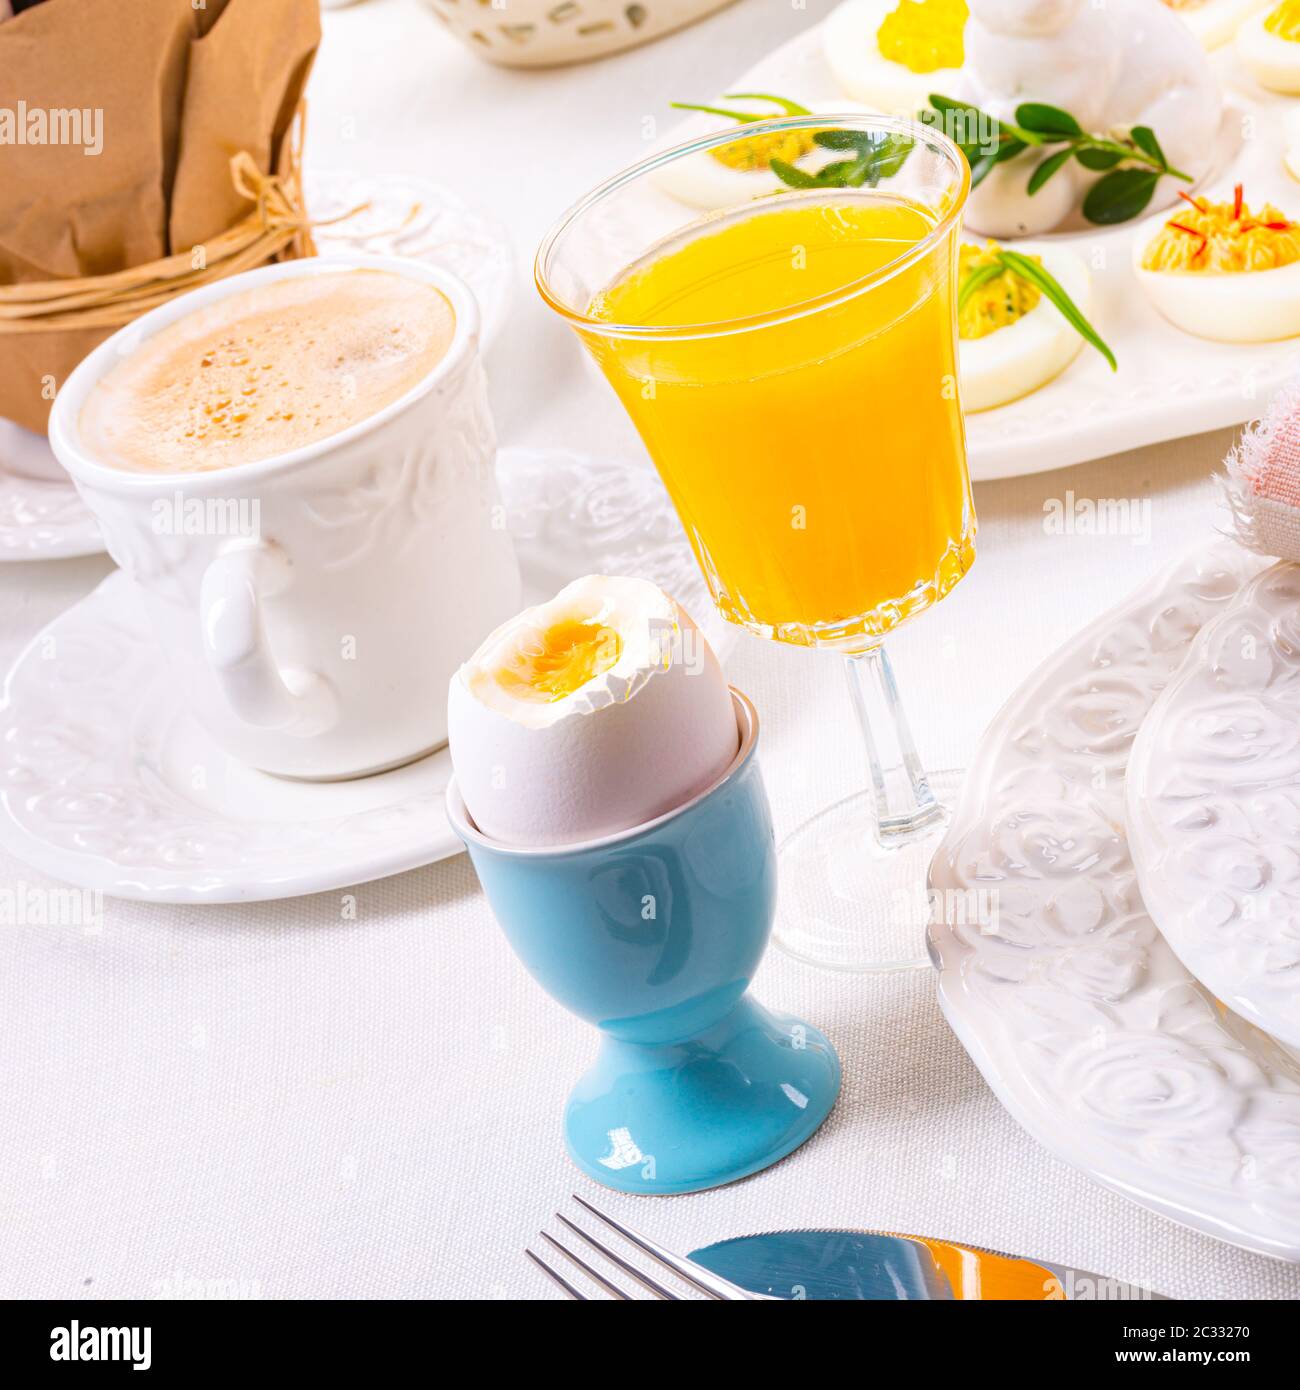 The perfect table with colorful table decorations for Easter Stock Photo